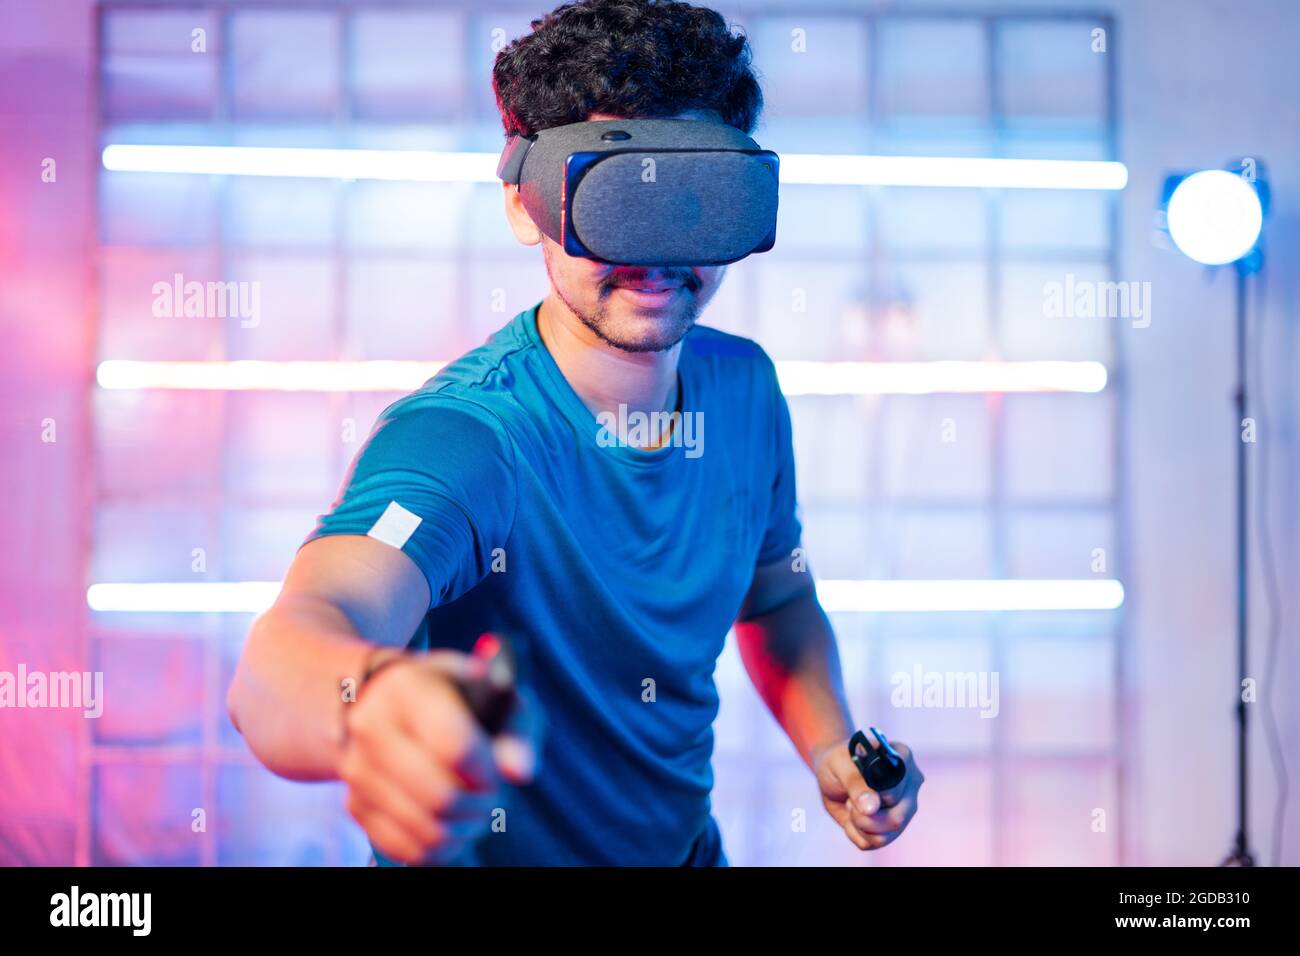 Young man playing video game by wearing vr or virtual reality goggles and holding joysticks in hands - concept of modern gaming technology Stock Photo